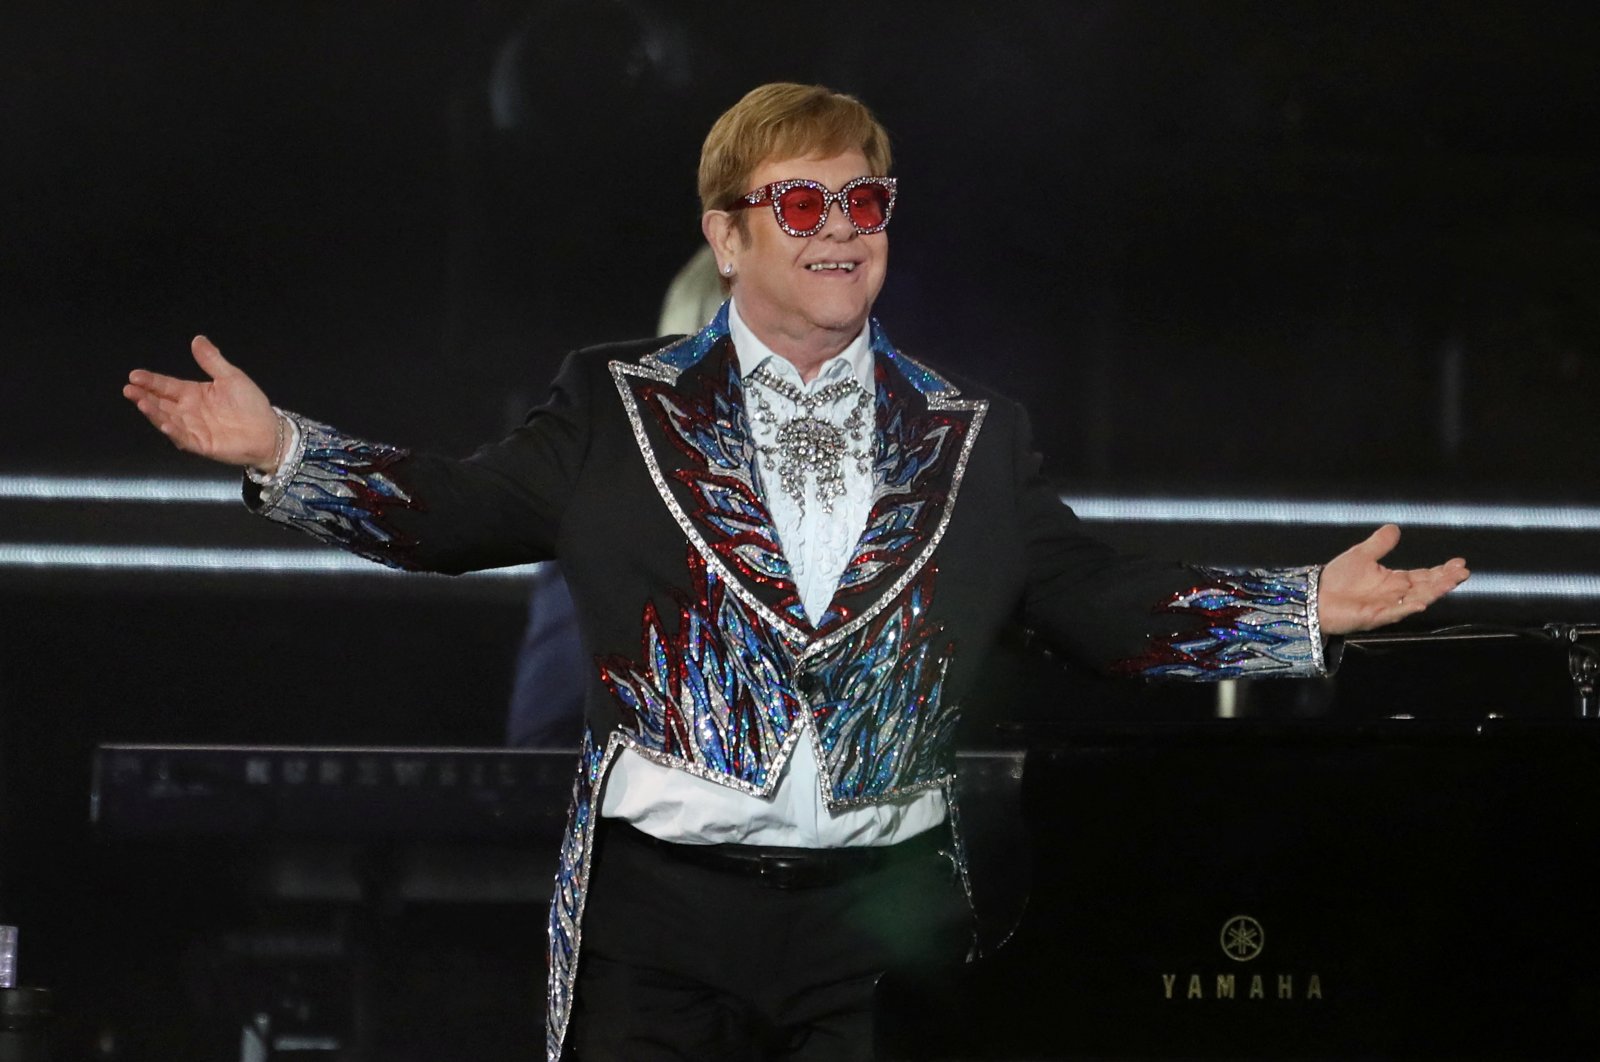 Elton John performs &quot;Bennie and the Jets&quot; as he wraps up the U.S. leg of his &quot;Yellow Brick Road&quot; tour at Dodger Stadium in Los Angeles, California, U.S. Nov. 20, 2022. (Reuters Photo)